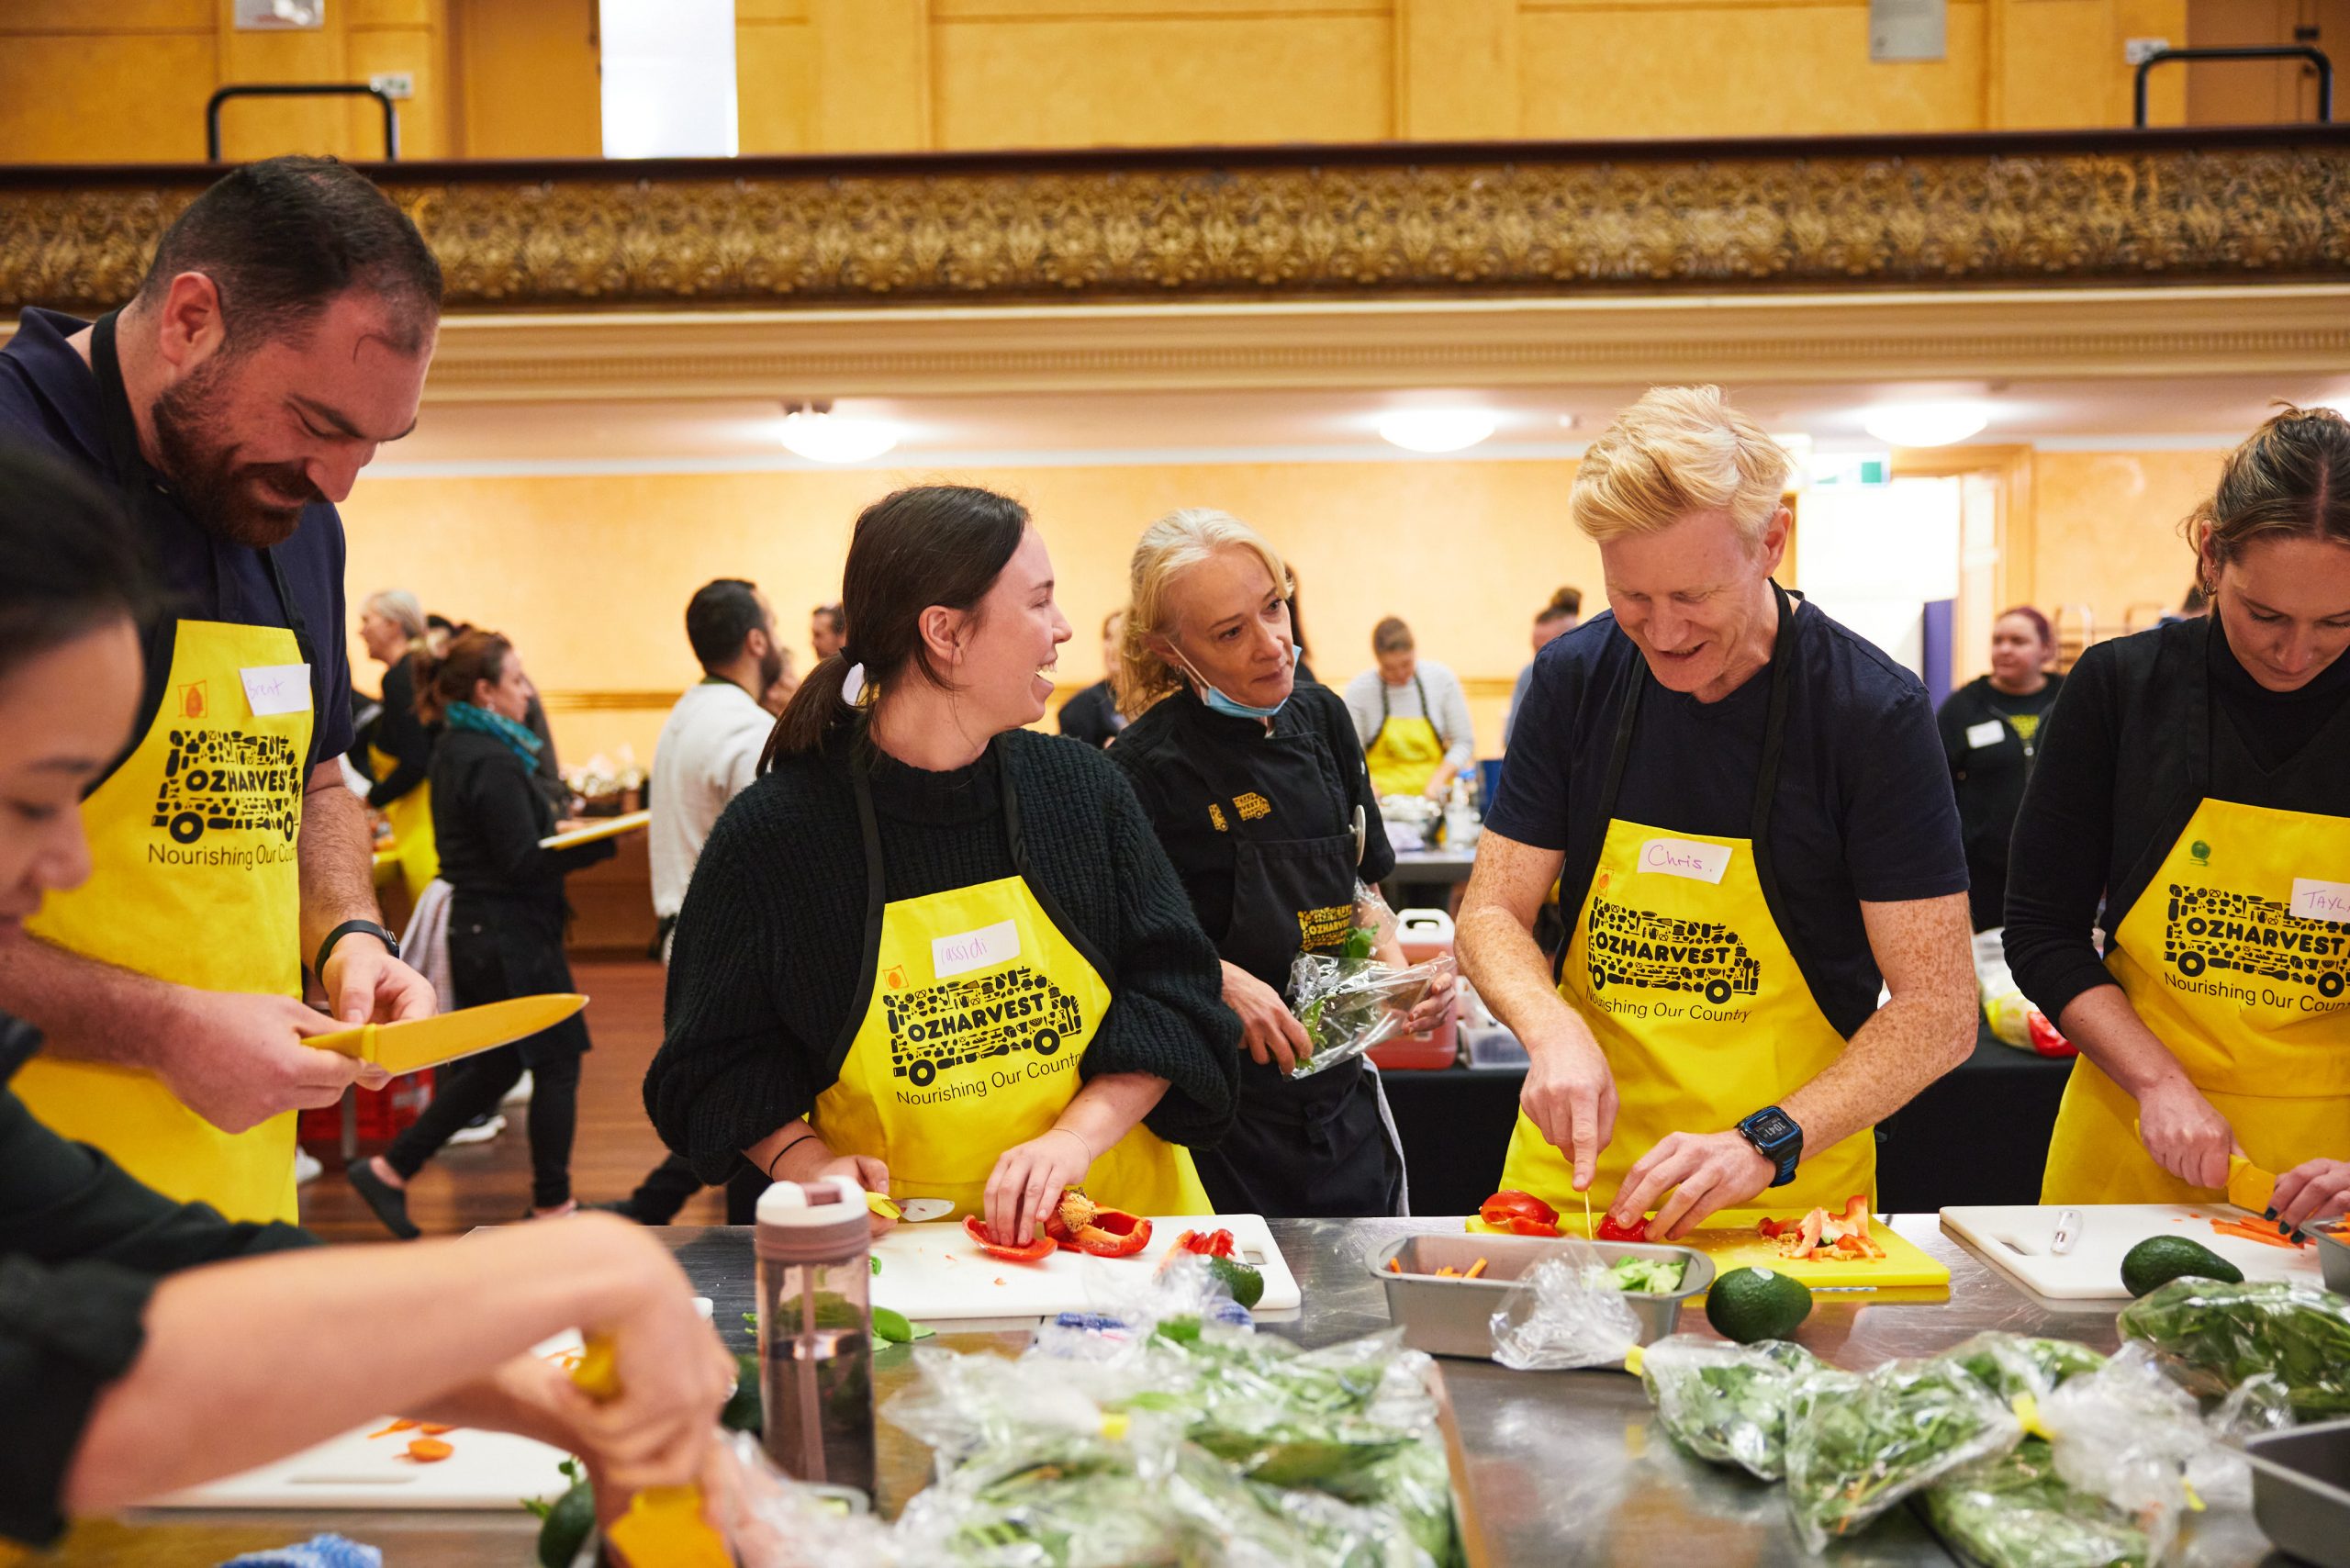 Several people preparing food and smiling, wearing Oz Harvest yellow aprons.